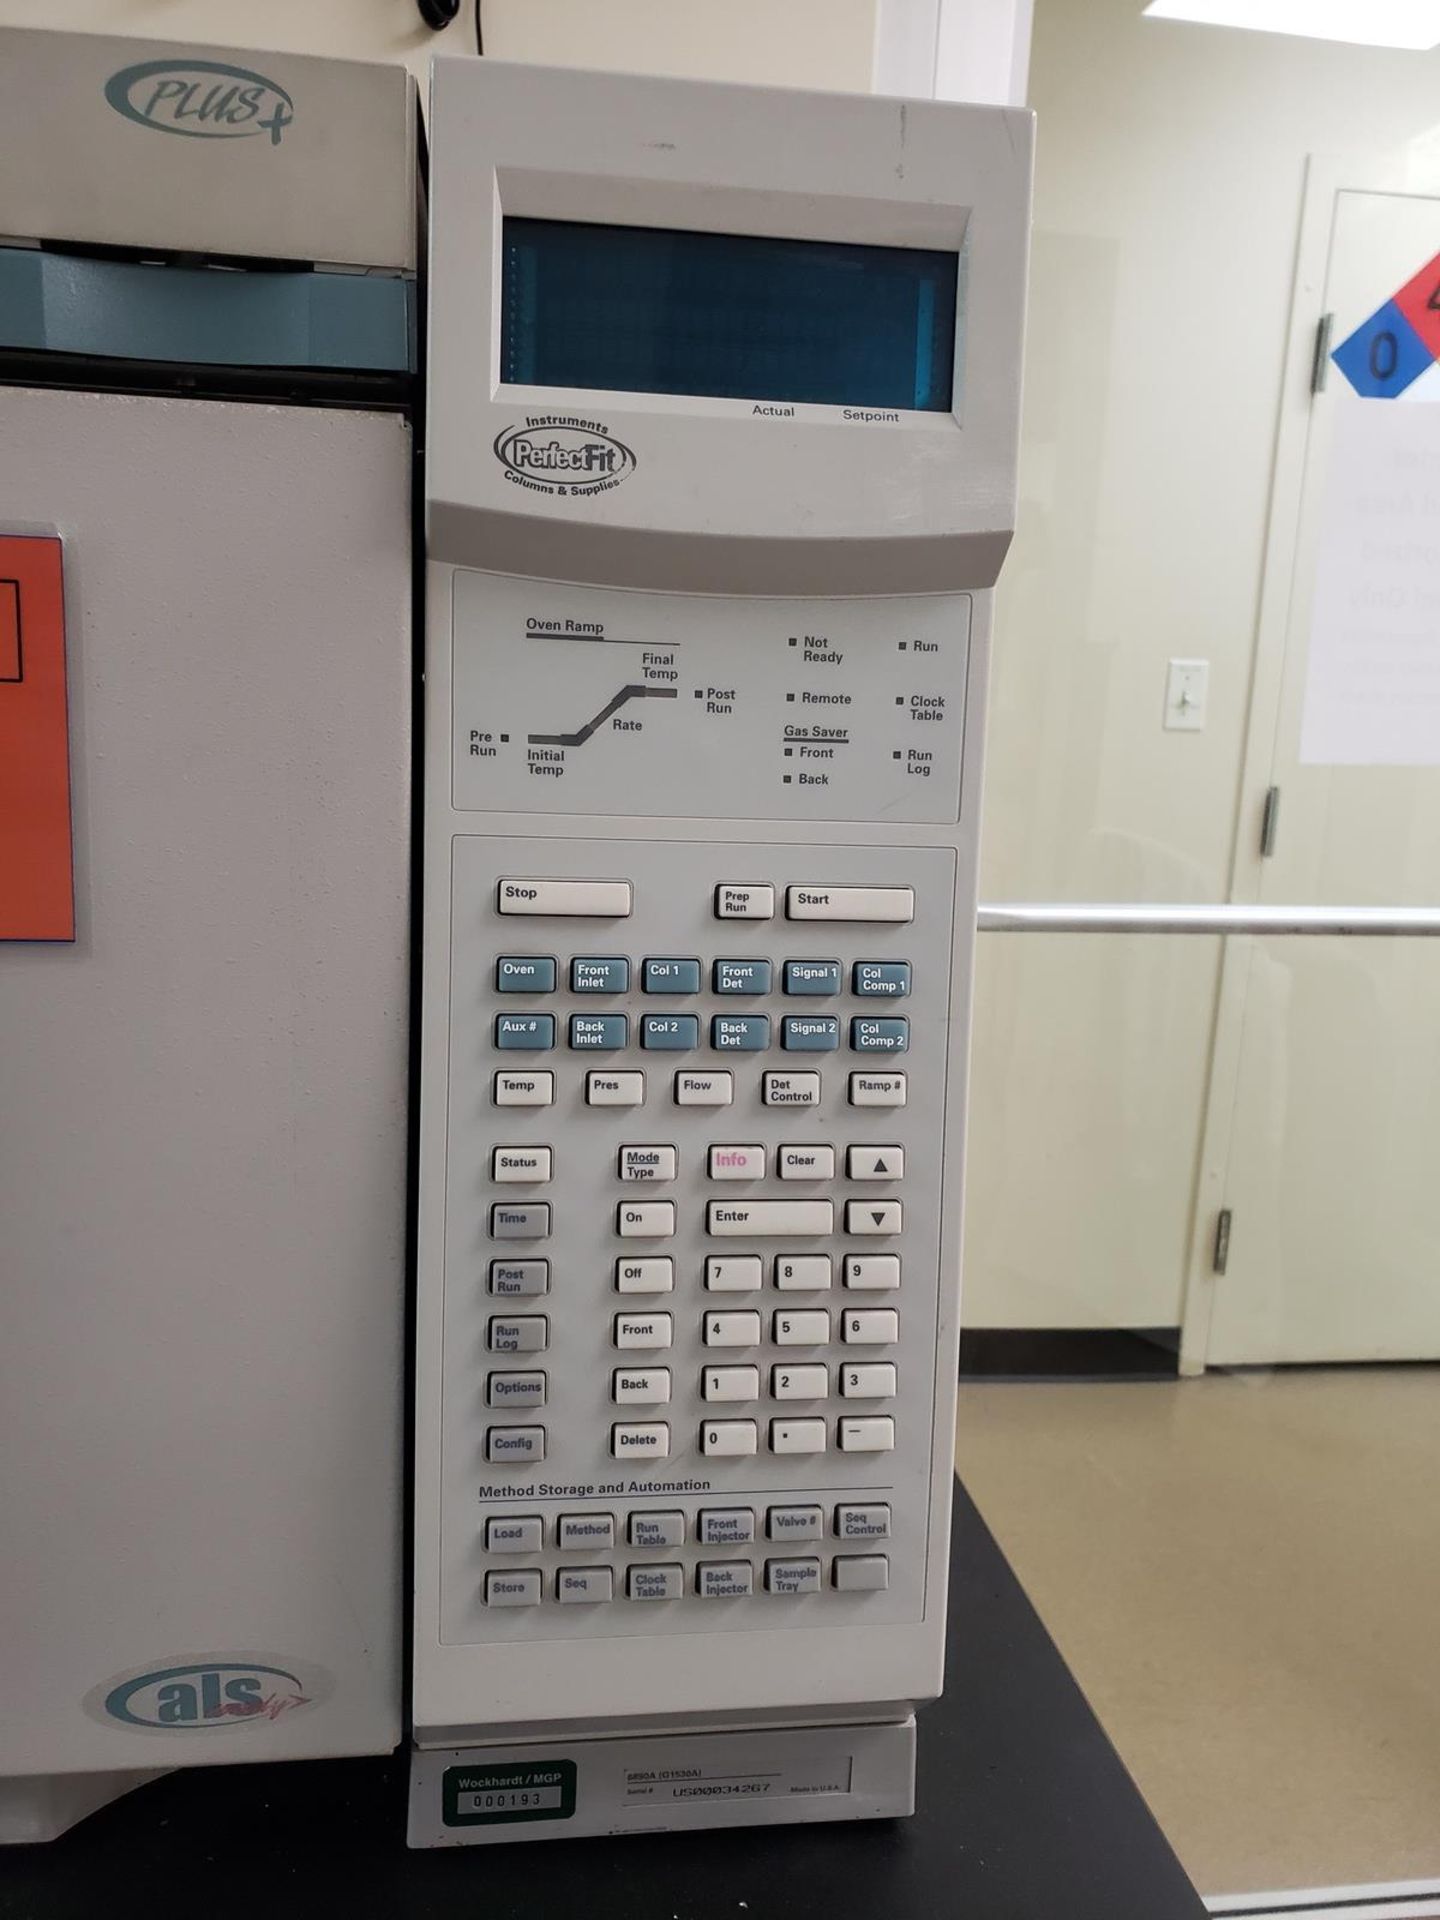 Agilent Technologies Chromatograph 6890 Network GC System, M# 6890A(G1530A), S/N | Rig Fee $See Desc - Image 3 of 8